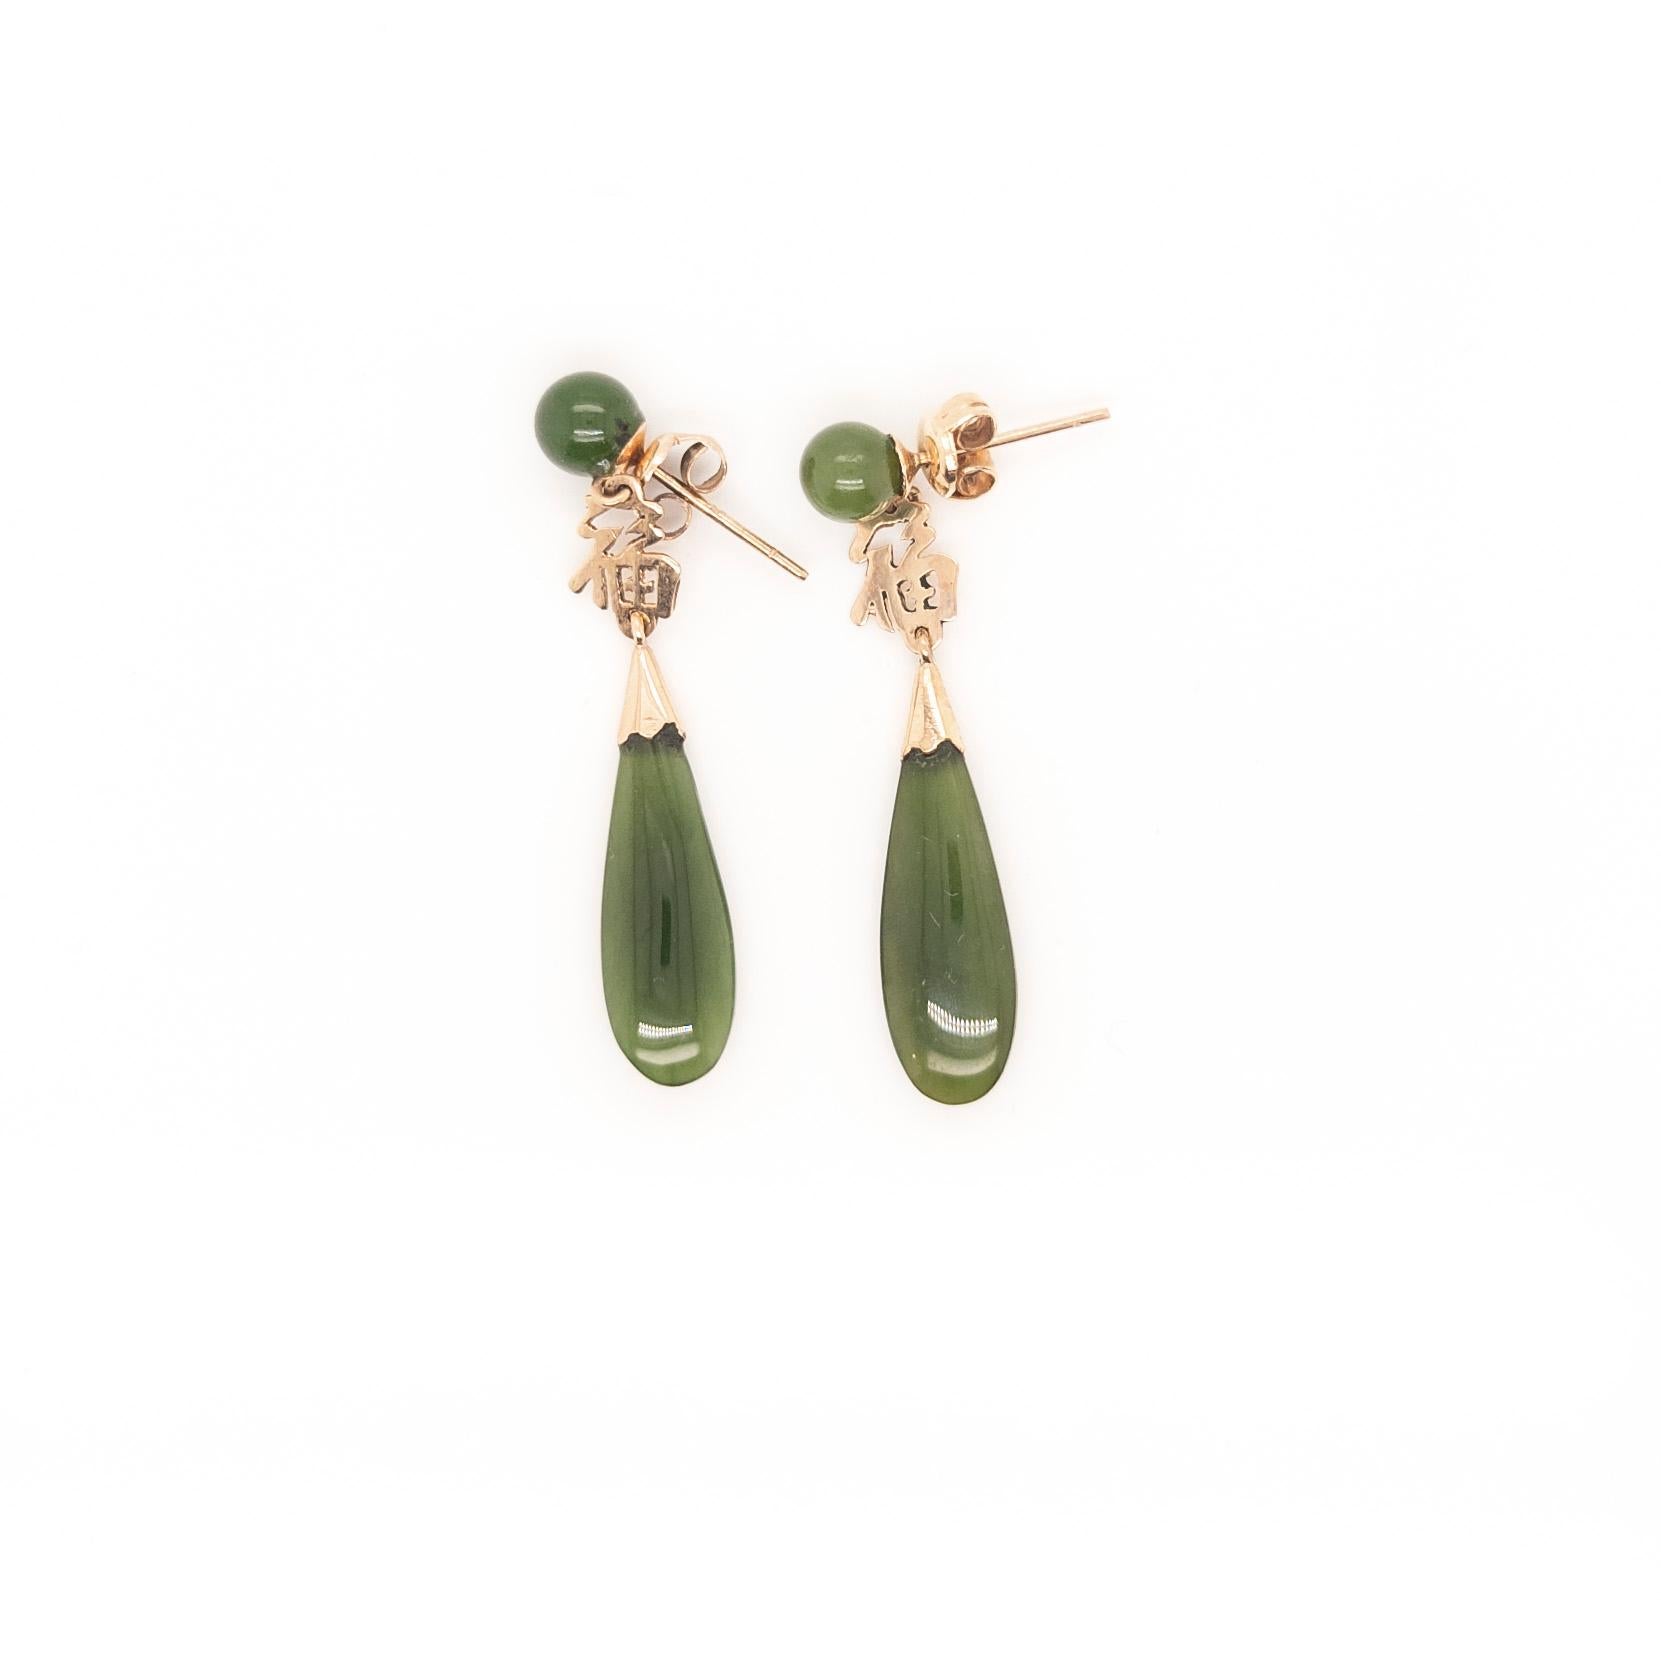 Vintage Chinese Gold & Jade 'Good Fortune' (福) Drop/Dangle Earrings  For Sale 2